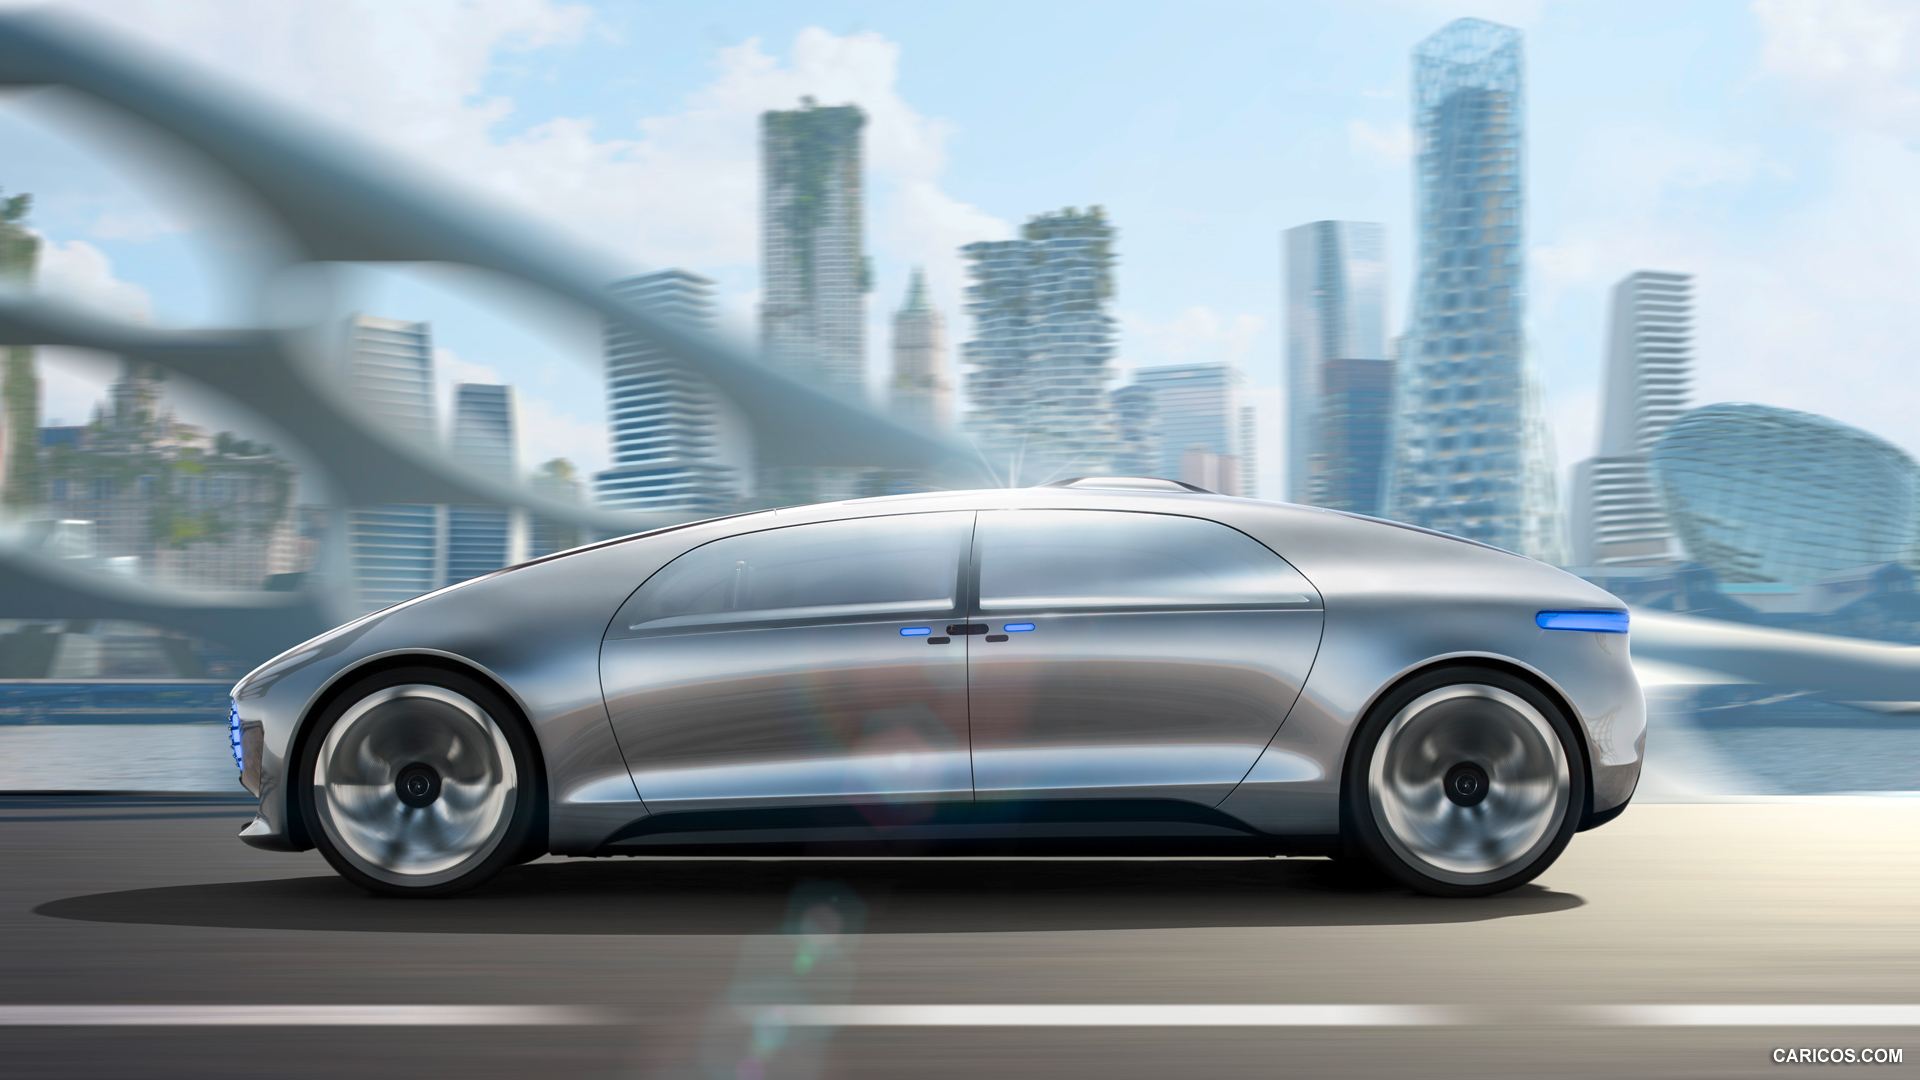 2015 Mercedes-Benz F 015 Luxury in Motion Concept  - Side, #6 of 92